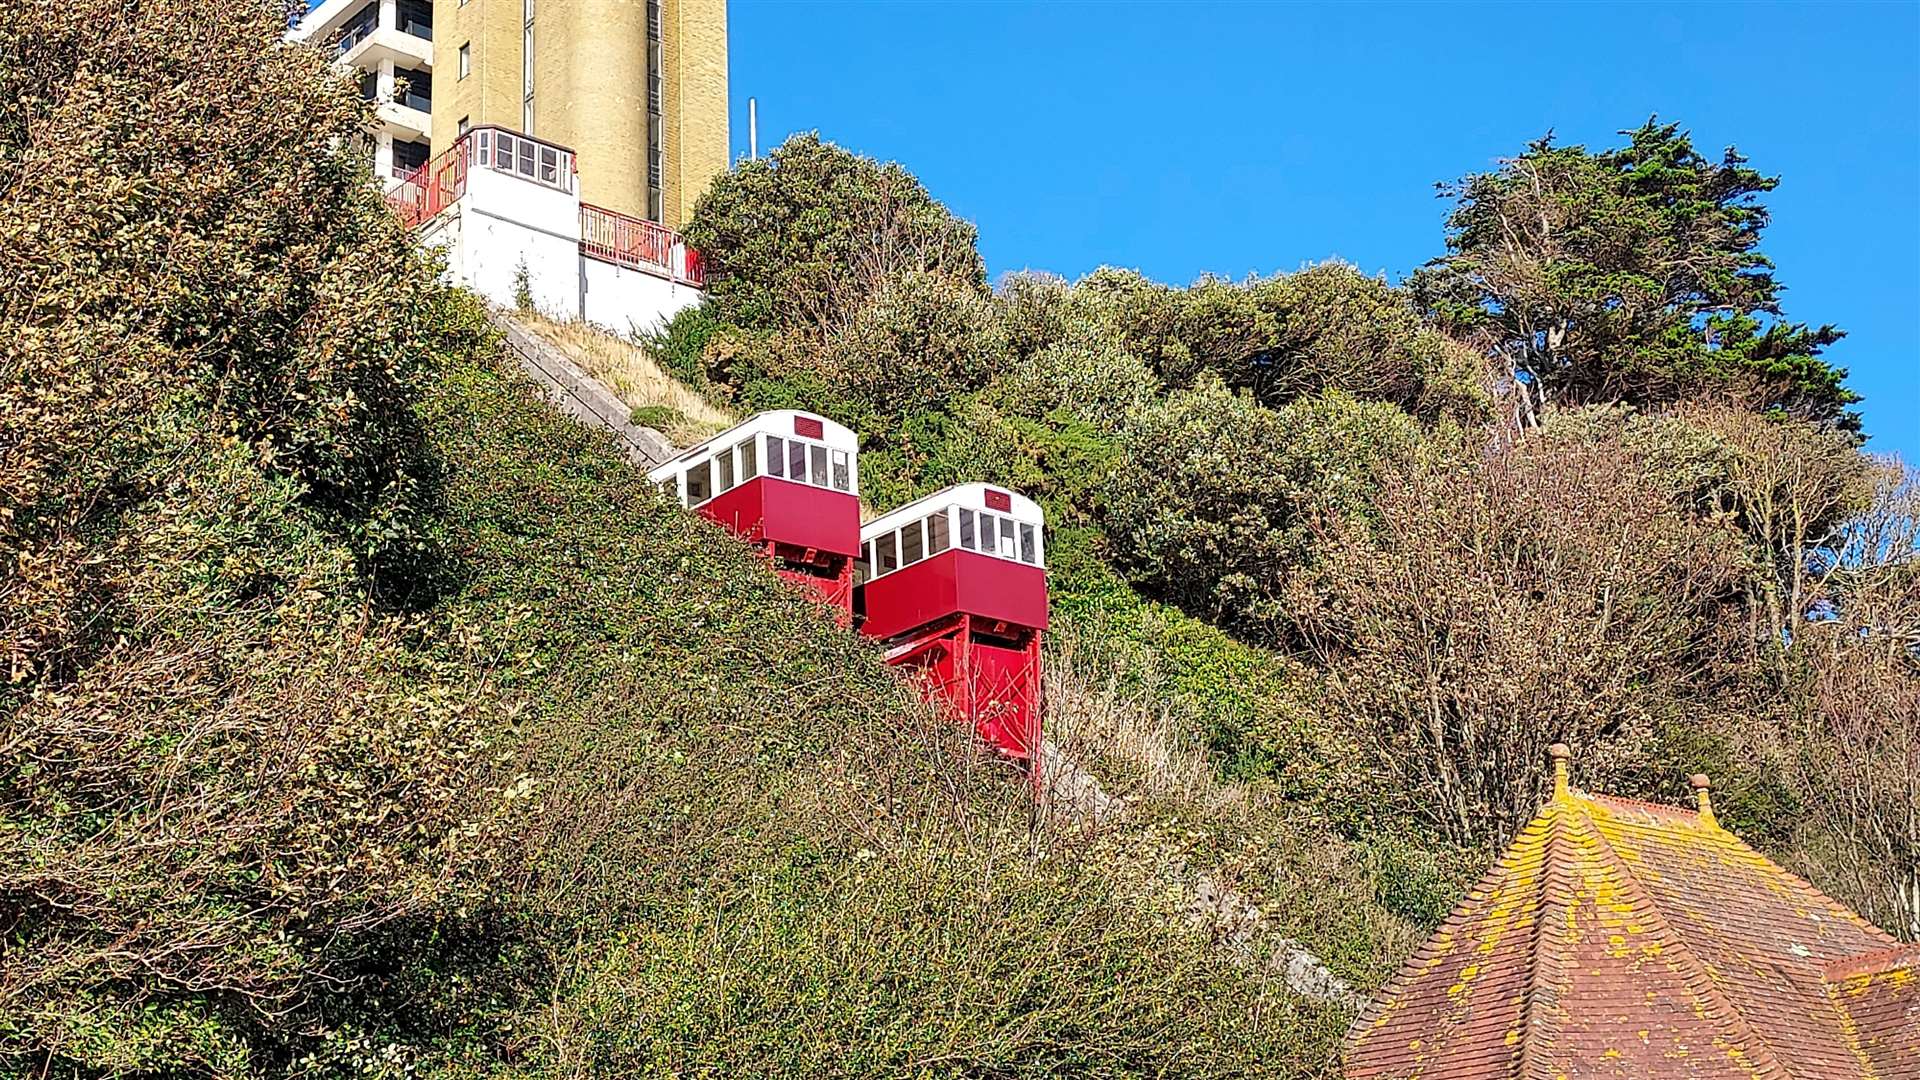 The Leas Lift funicular railway connects The Leas and the seafront in Folkestone